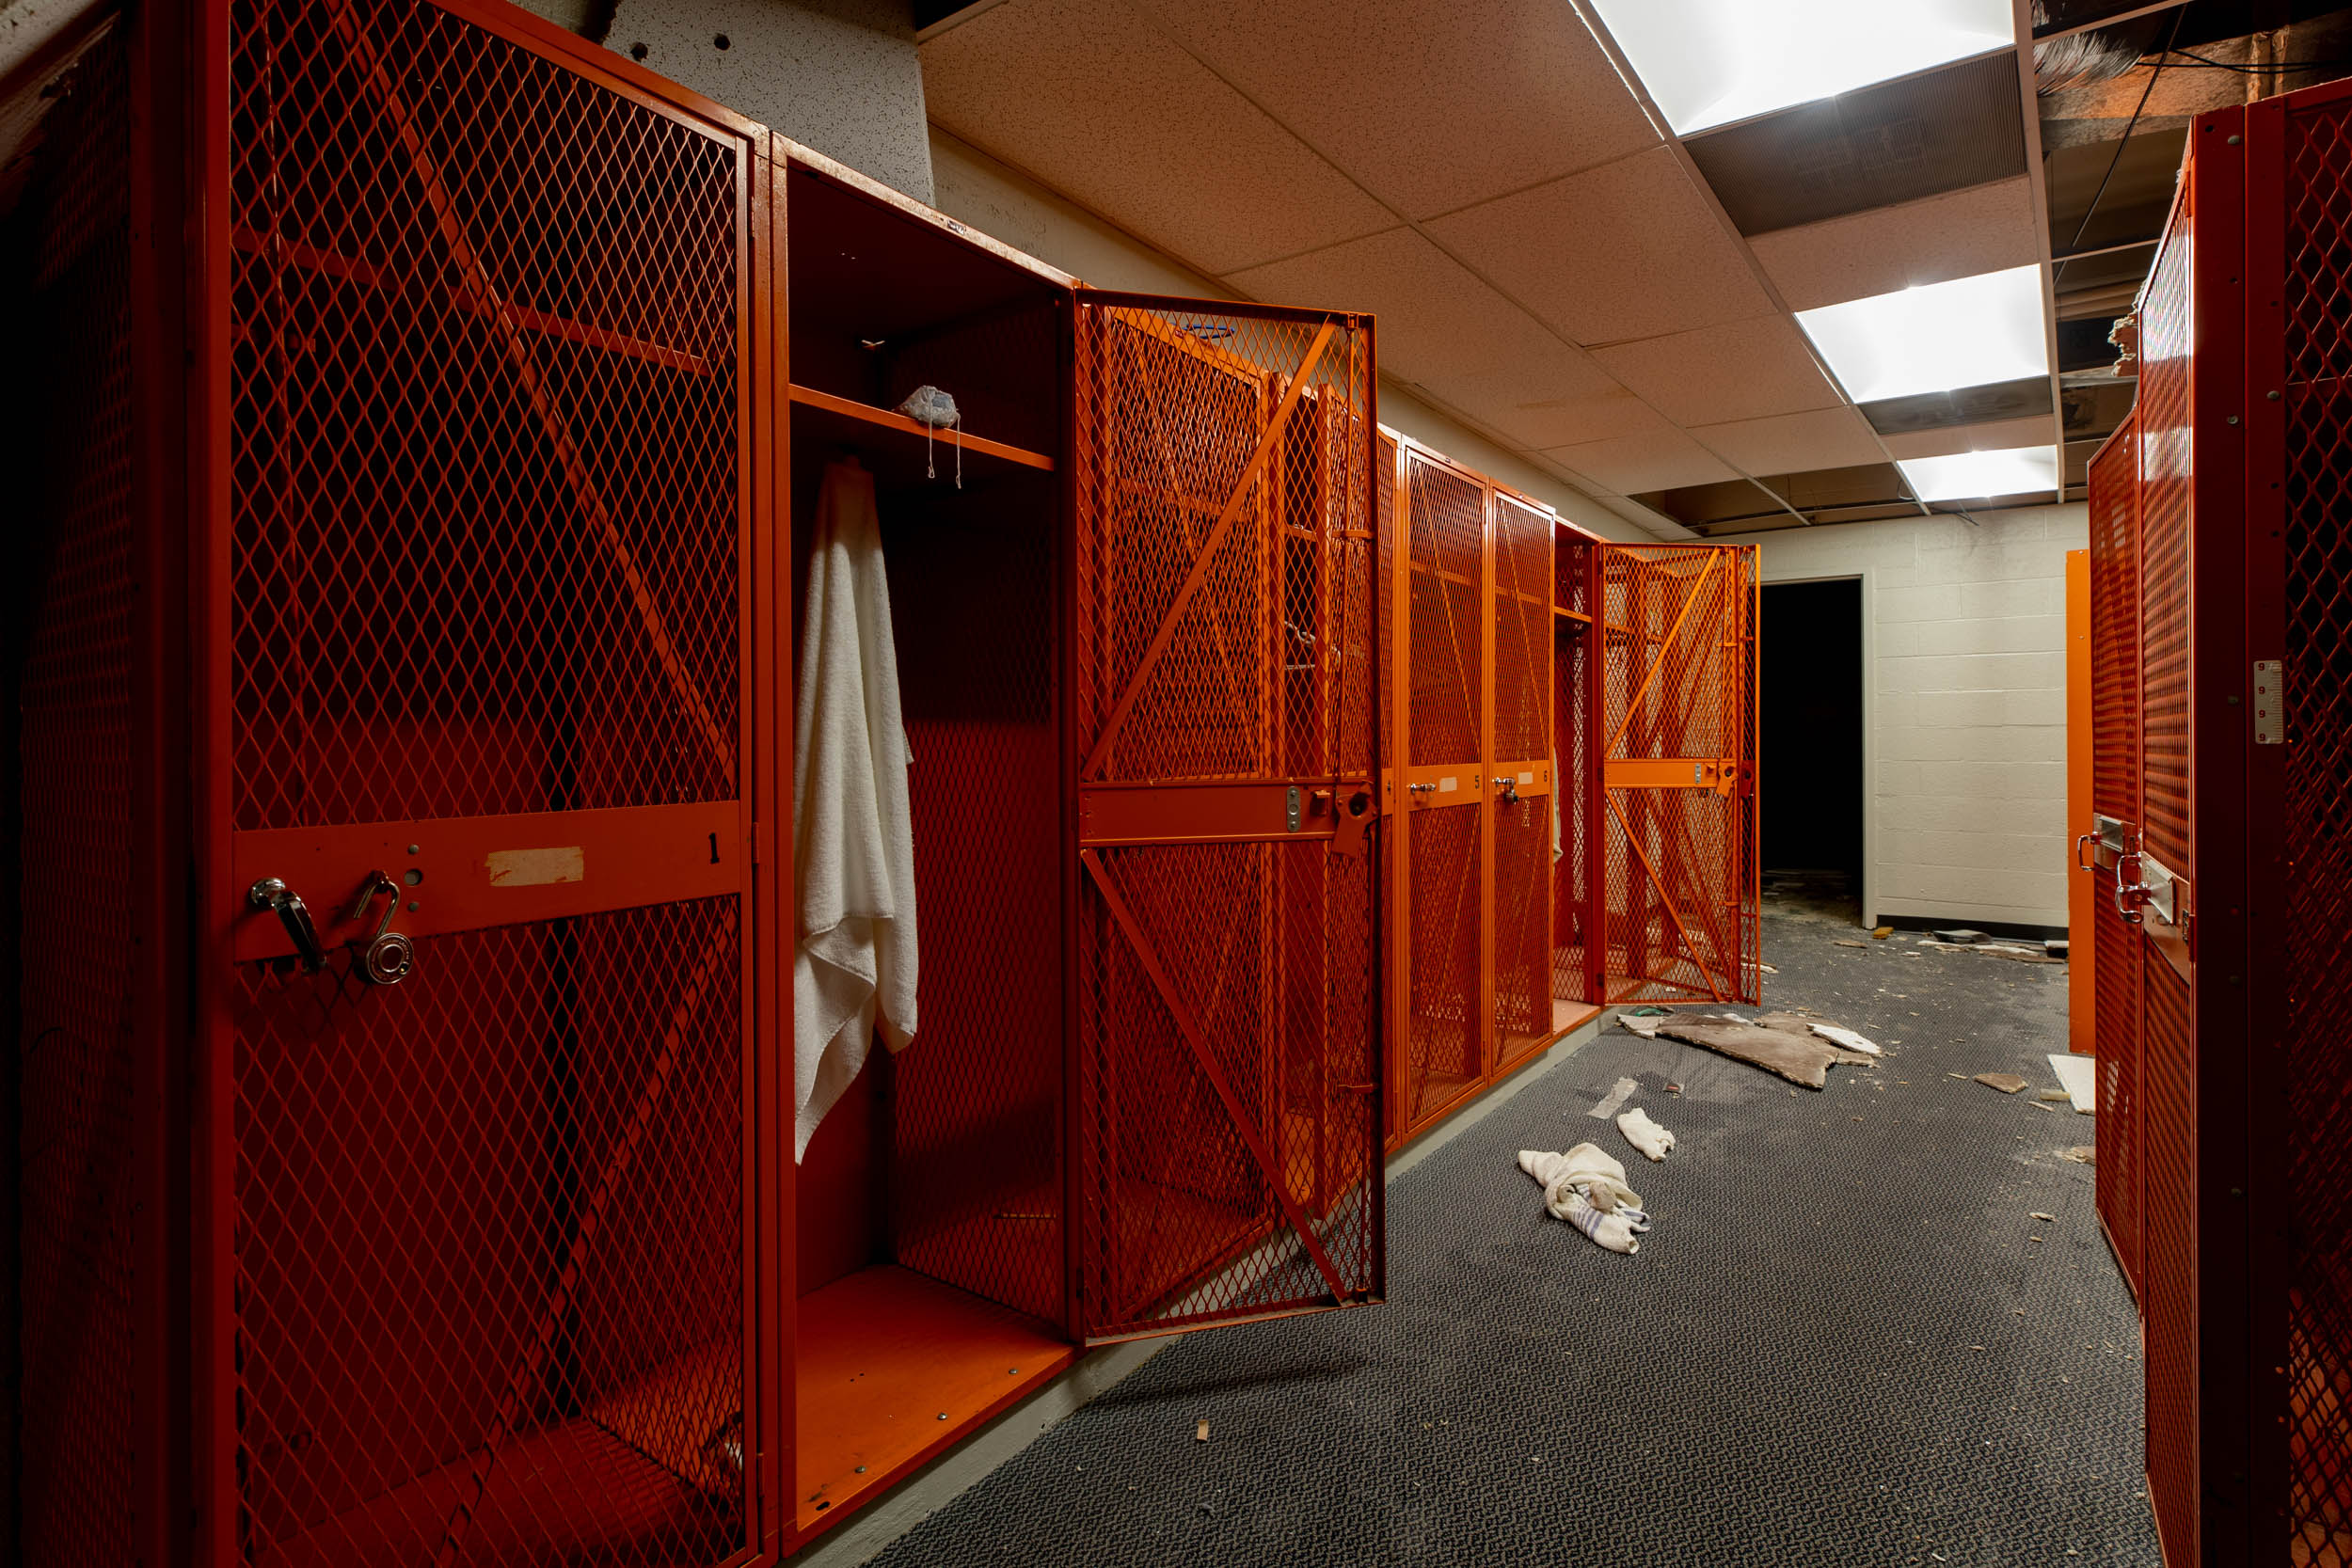 Metal Lockers with a towel hanging in one of them